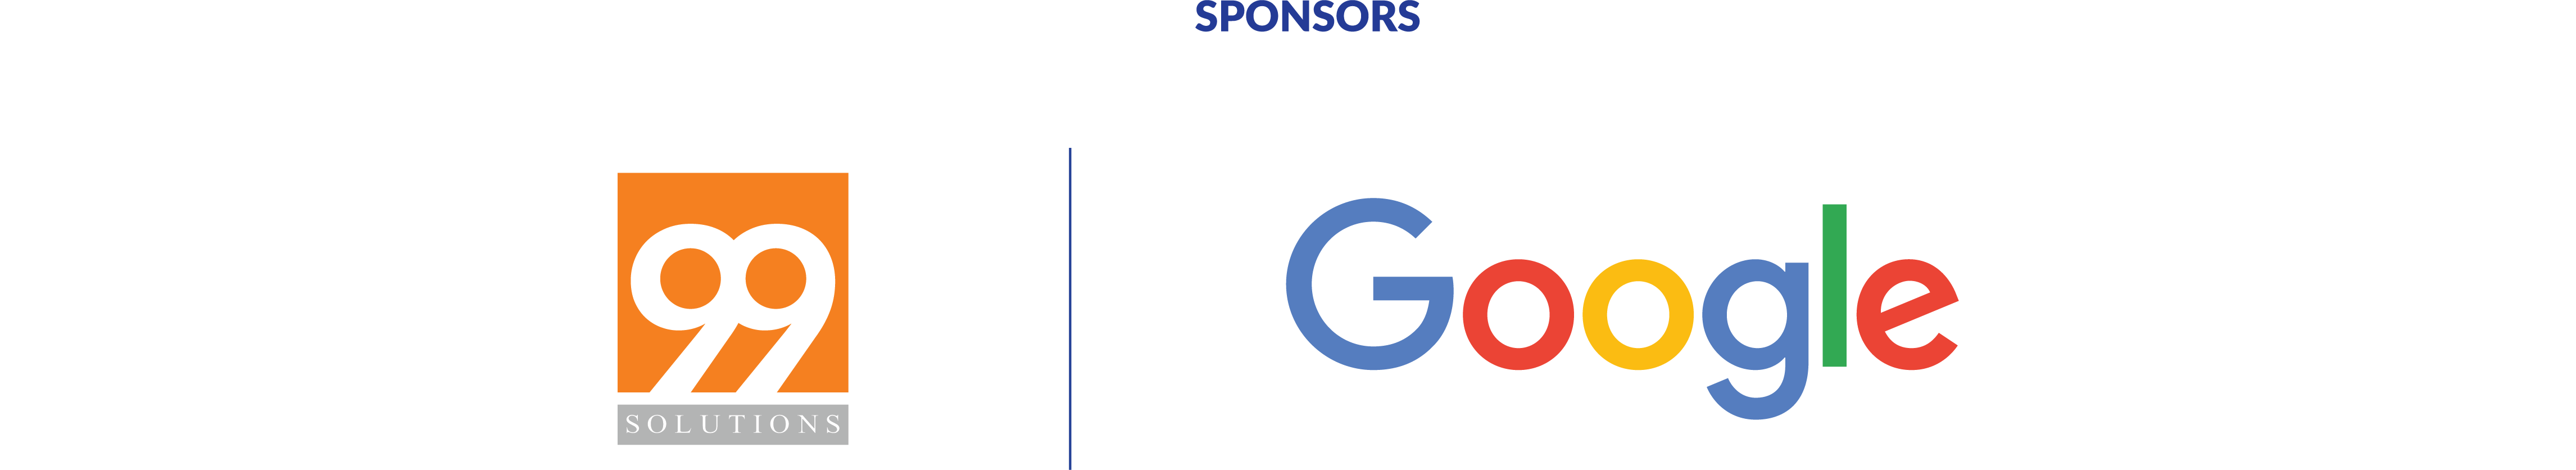 74th Pocket Summary sponsor Google and 99 Solutions